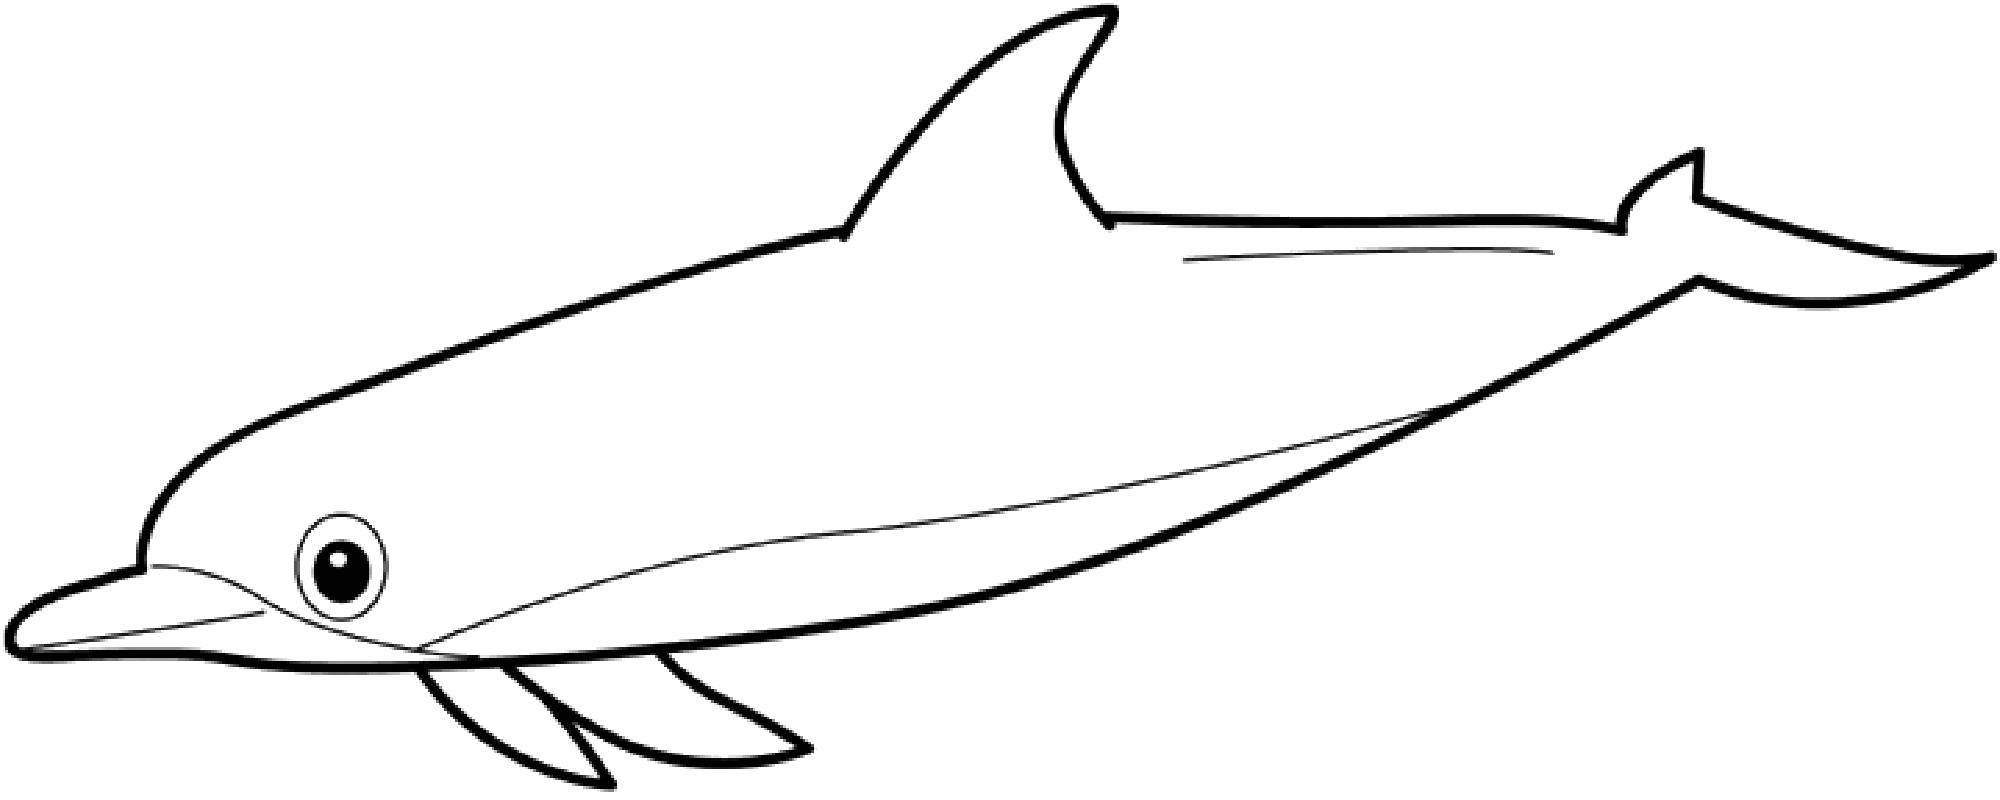 Coloring Dolphin. Category Marine animals. Tags:  Underwater world, Dolphin.